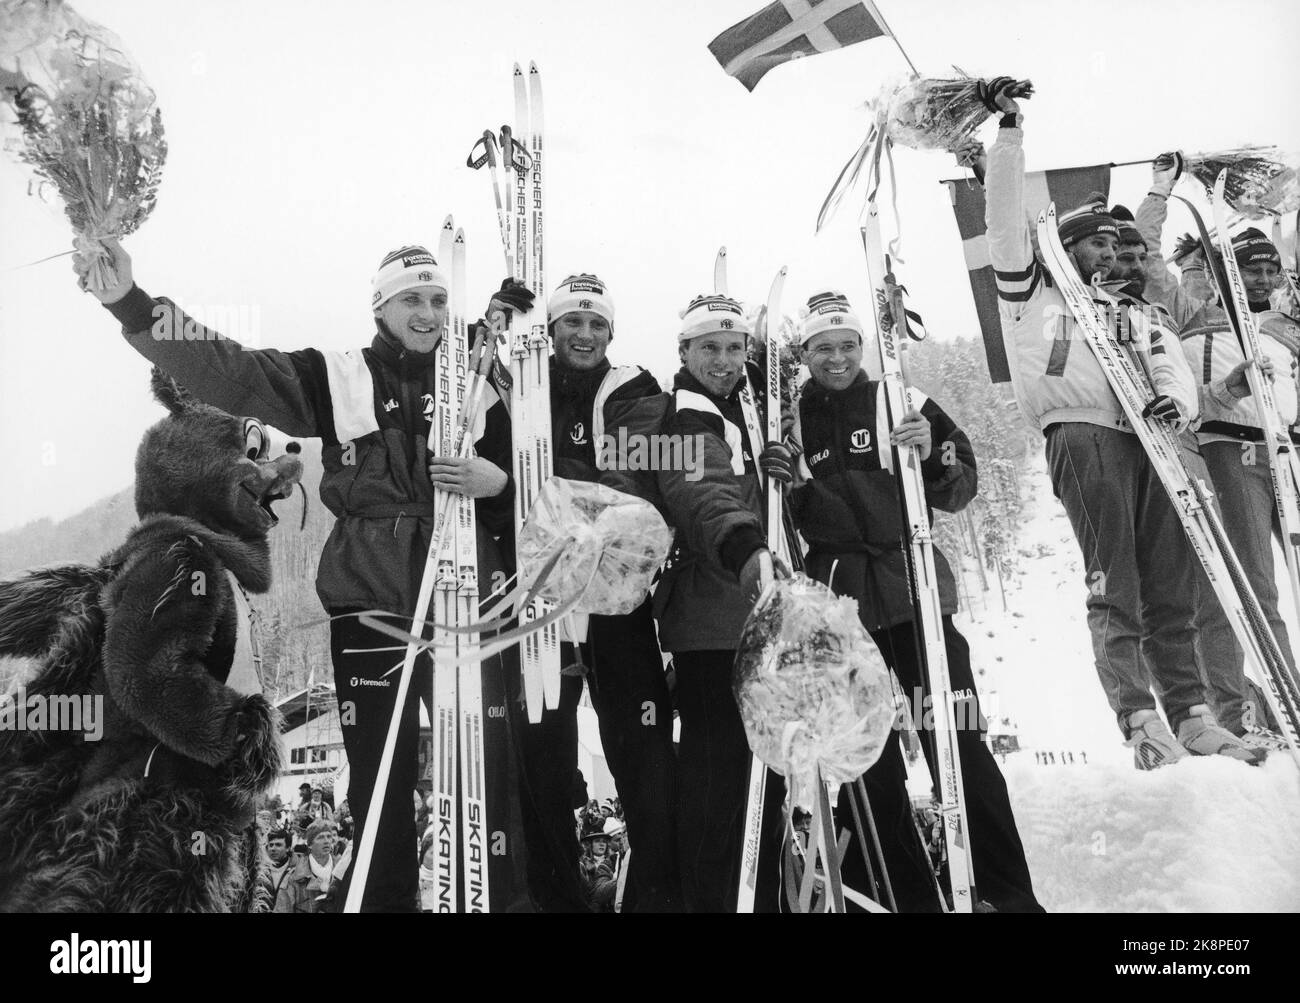 Oberstdorf, West Germany19870217. Ski World Cup, Nordic branches. Relay, 4 x 10 km. The Norwegian relay team that took bronze, despite the fall to Aunli. F. v. Terje Langli, Vegard Ulvang, Pål Gunnar Mikkelsplats and Ove Aunli at the flower ceremony. T.H. See the Swedish team that won: as consisted of Gunde Svan, Thomas Wassberg,  Photo: NTB Stock Photo